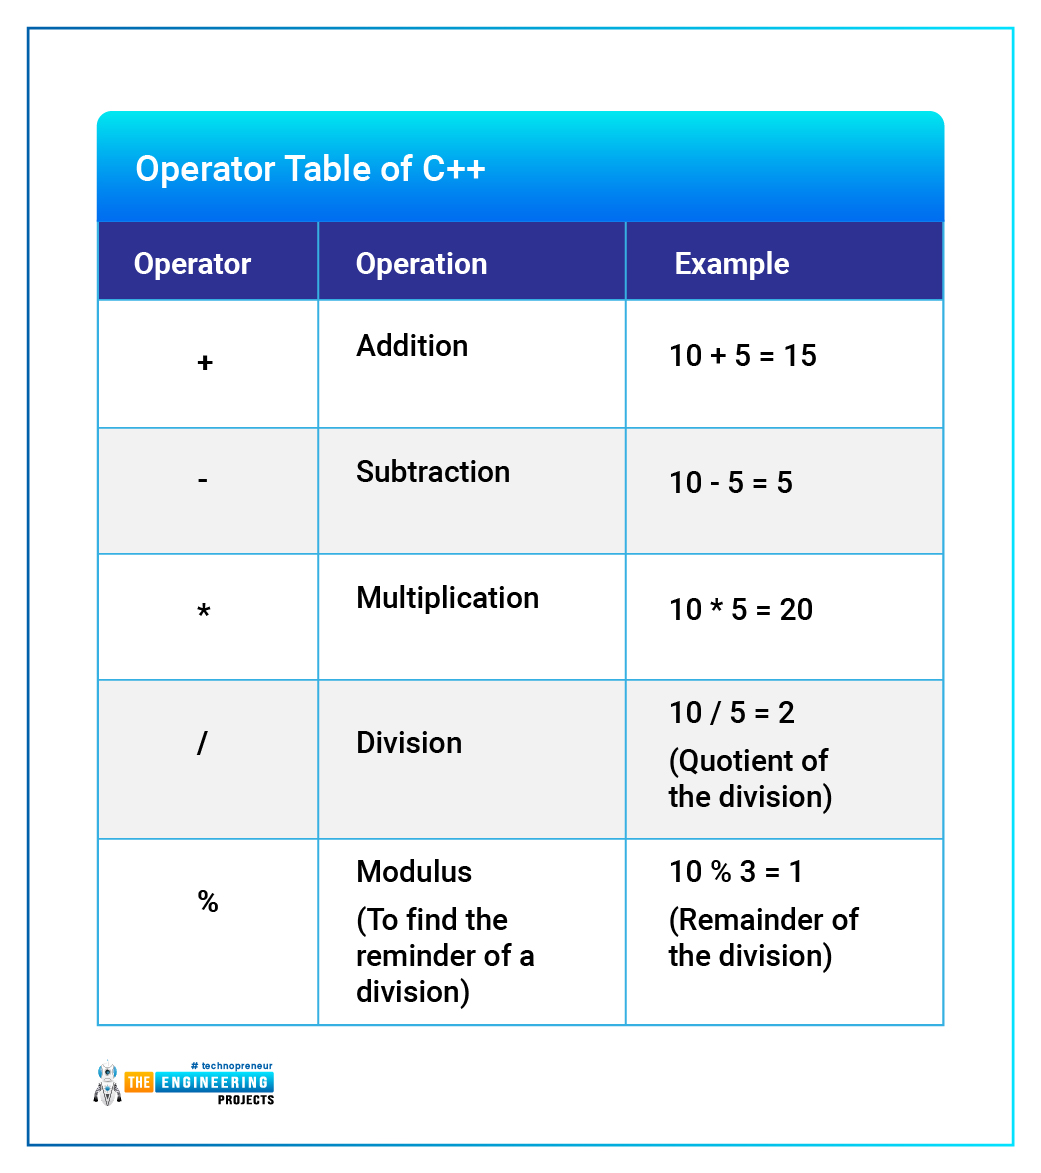 Uses of C++, Introduction to C++, Features of C++, Basic concepts of C++, syntax of C++, Comments in C++, Modifiers in C++